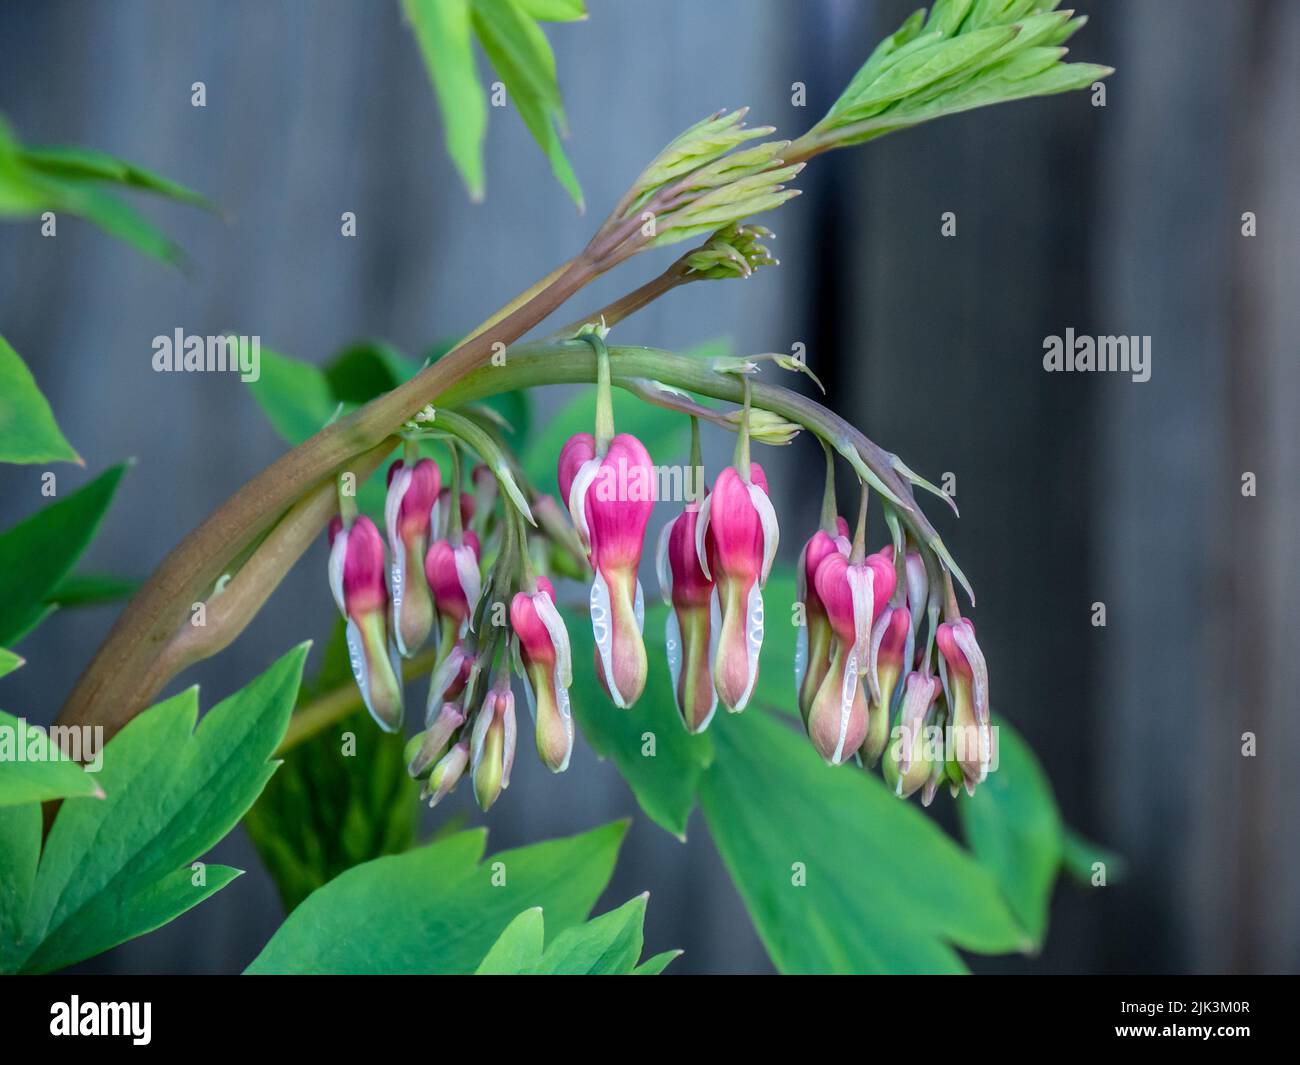 Close-up of the pink and white flowers on a bleeding-heart plant that is starting to bloom in a garden on a warm spring day in May. Stock Photo